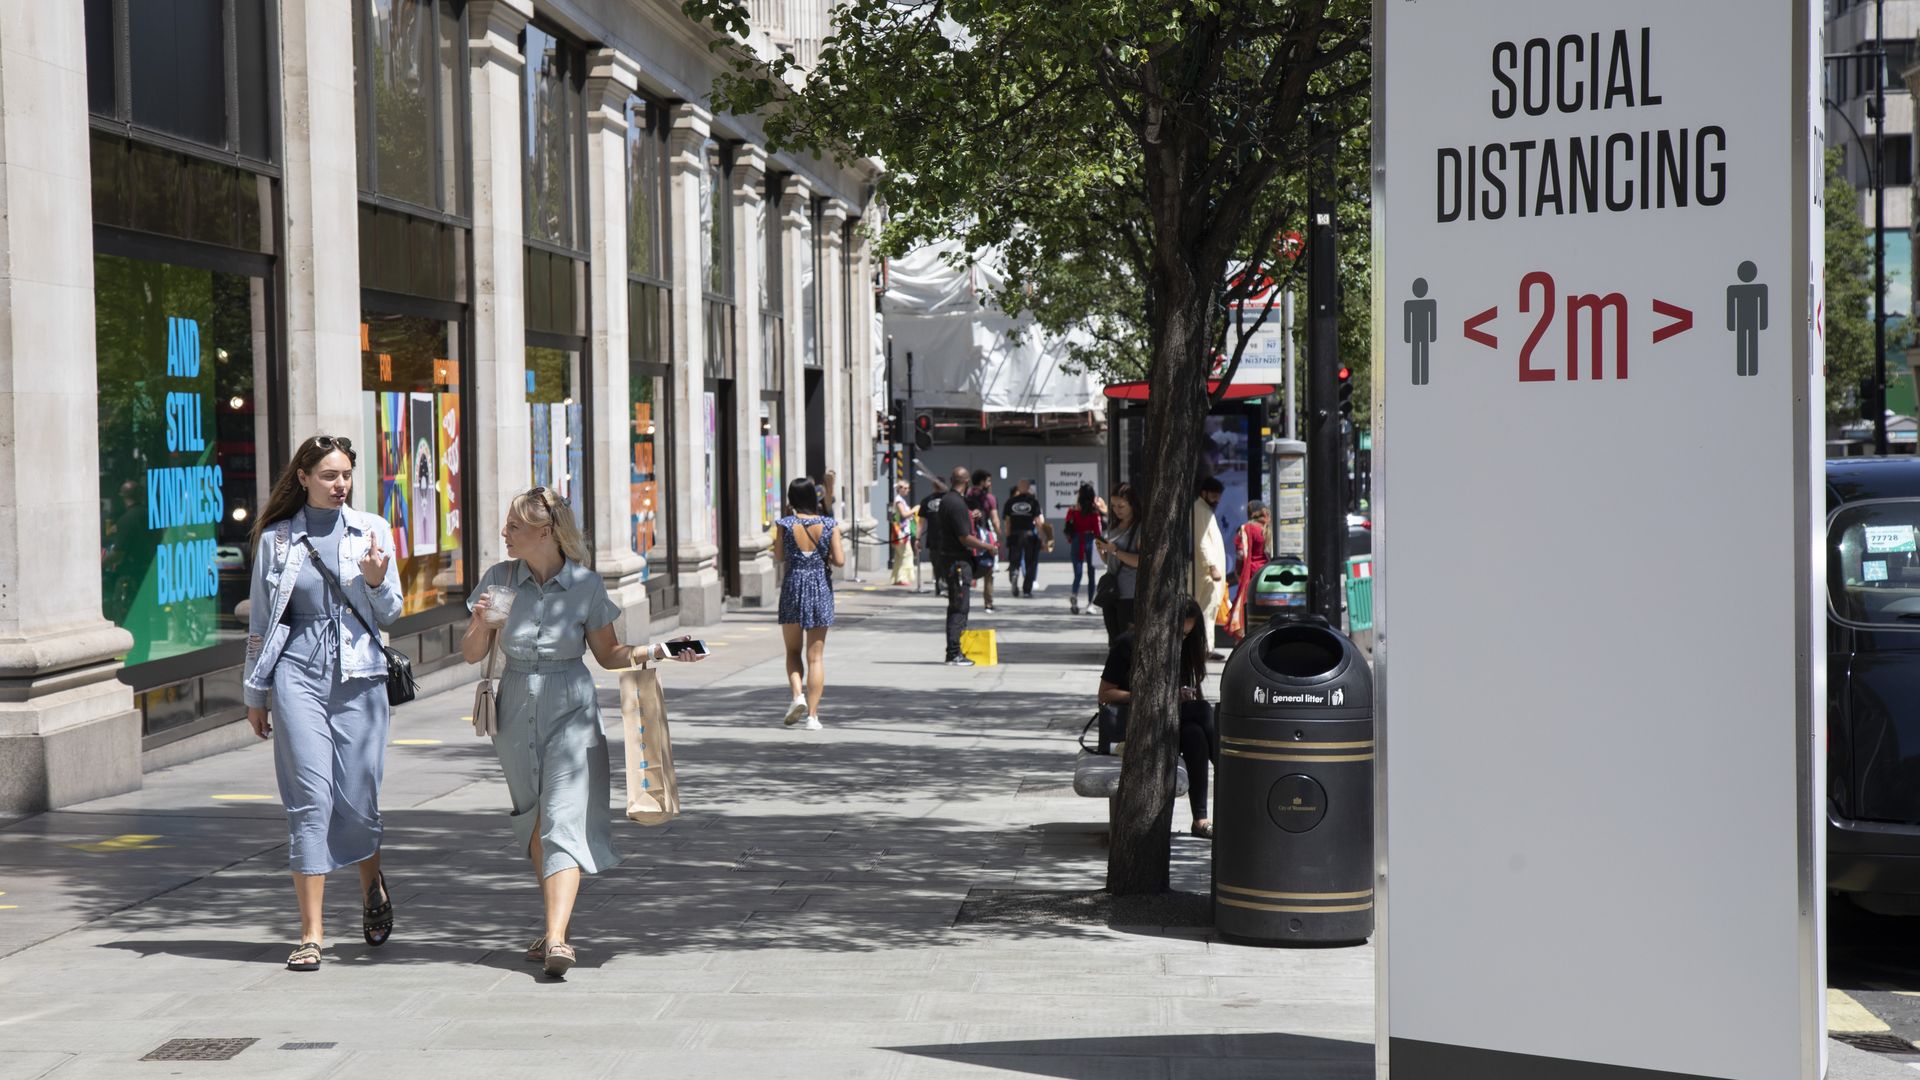 People walking past a social distancing sign on June 22 in London.